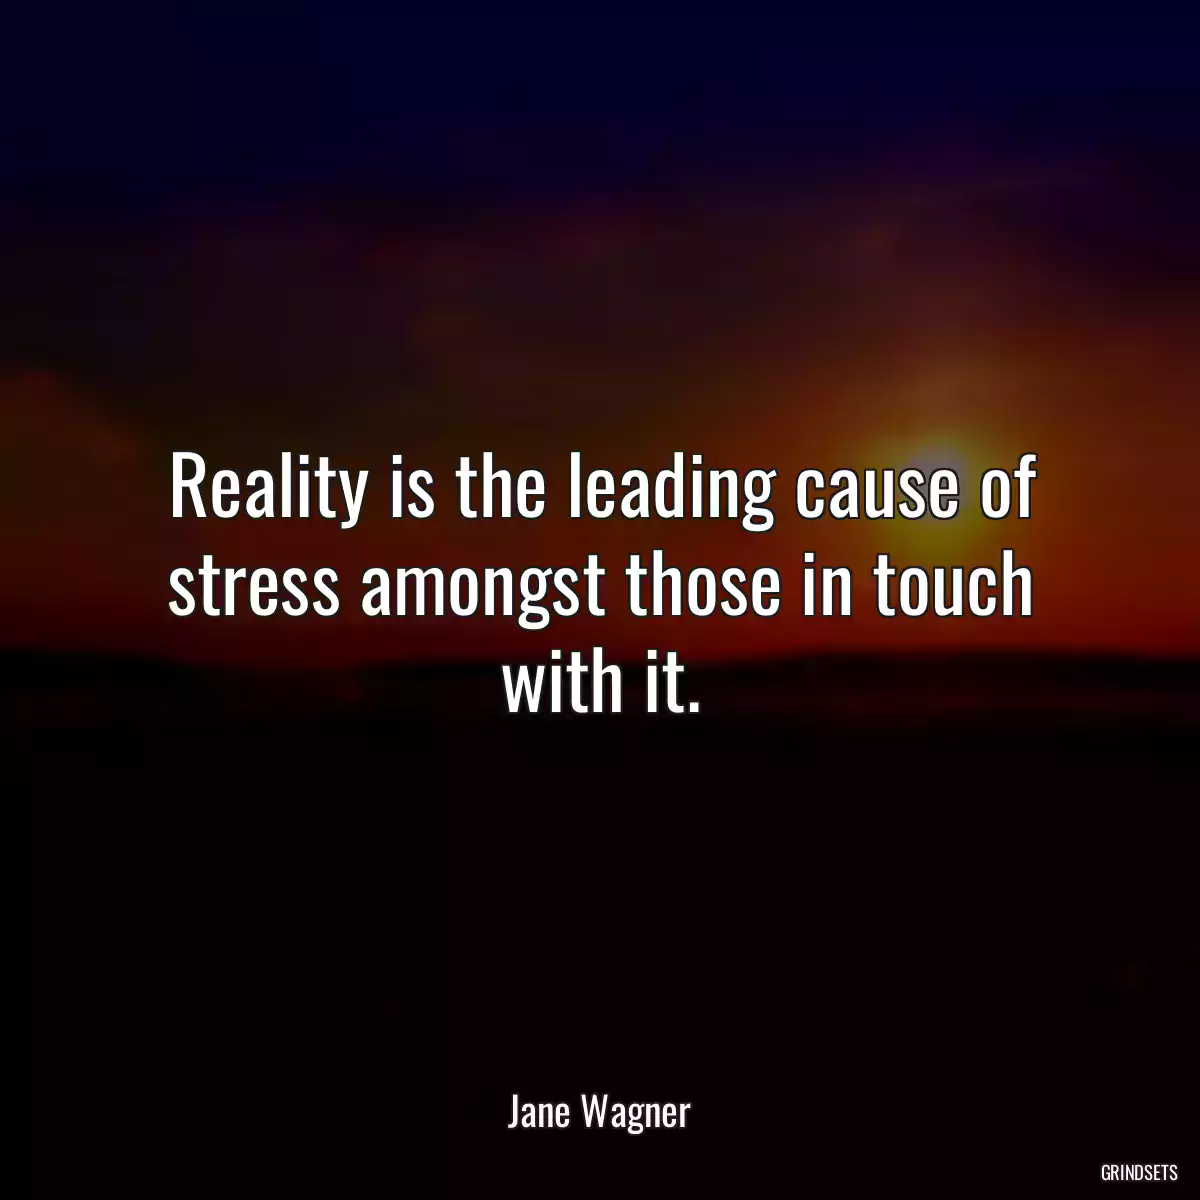 Reality is the leading cause of stress amongst those in touch with it.